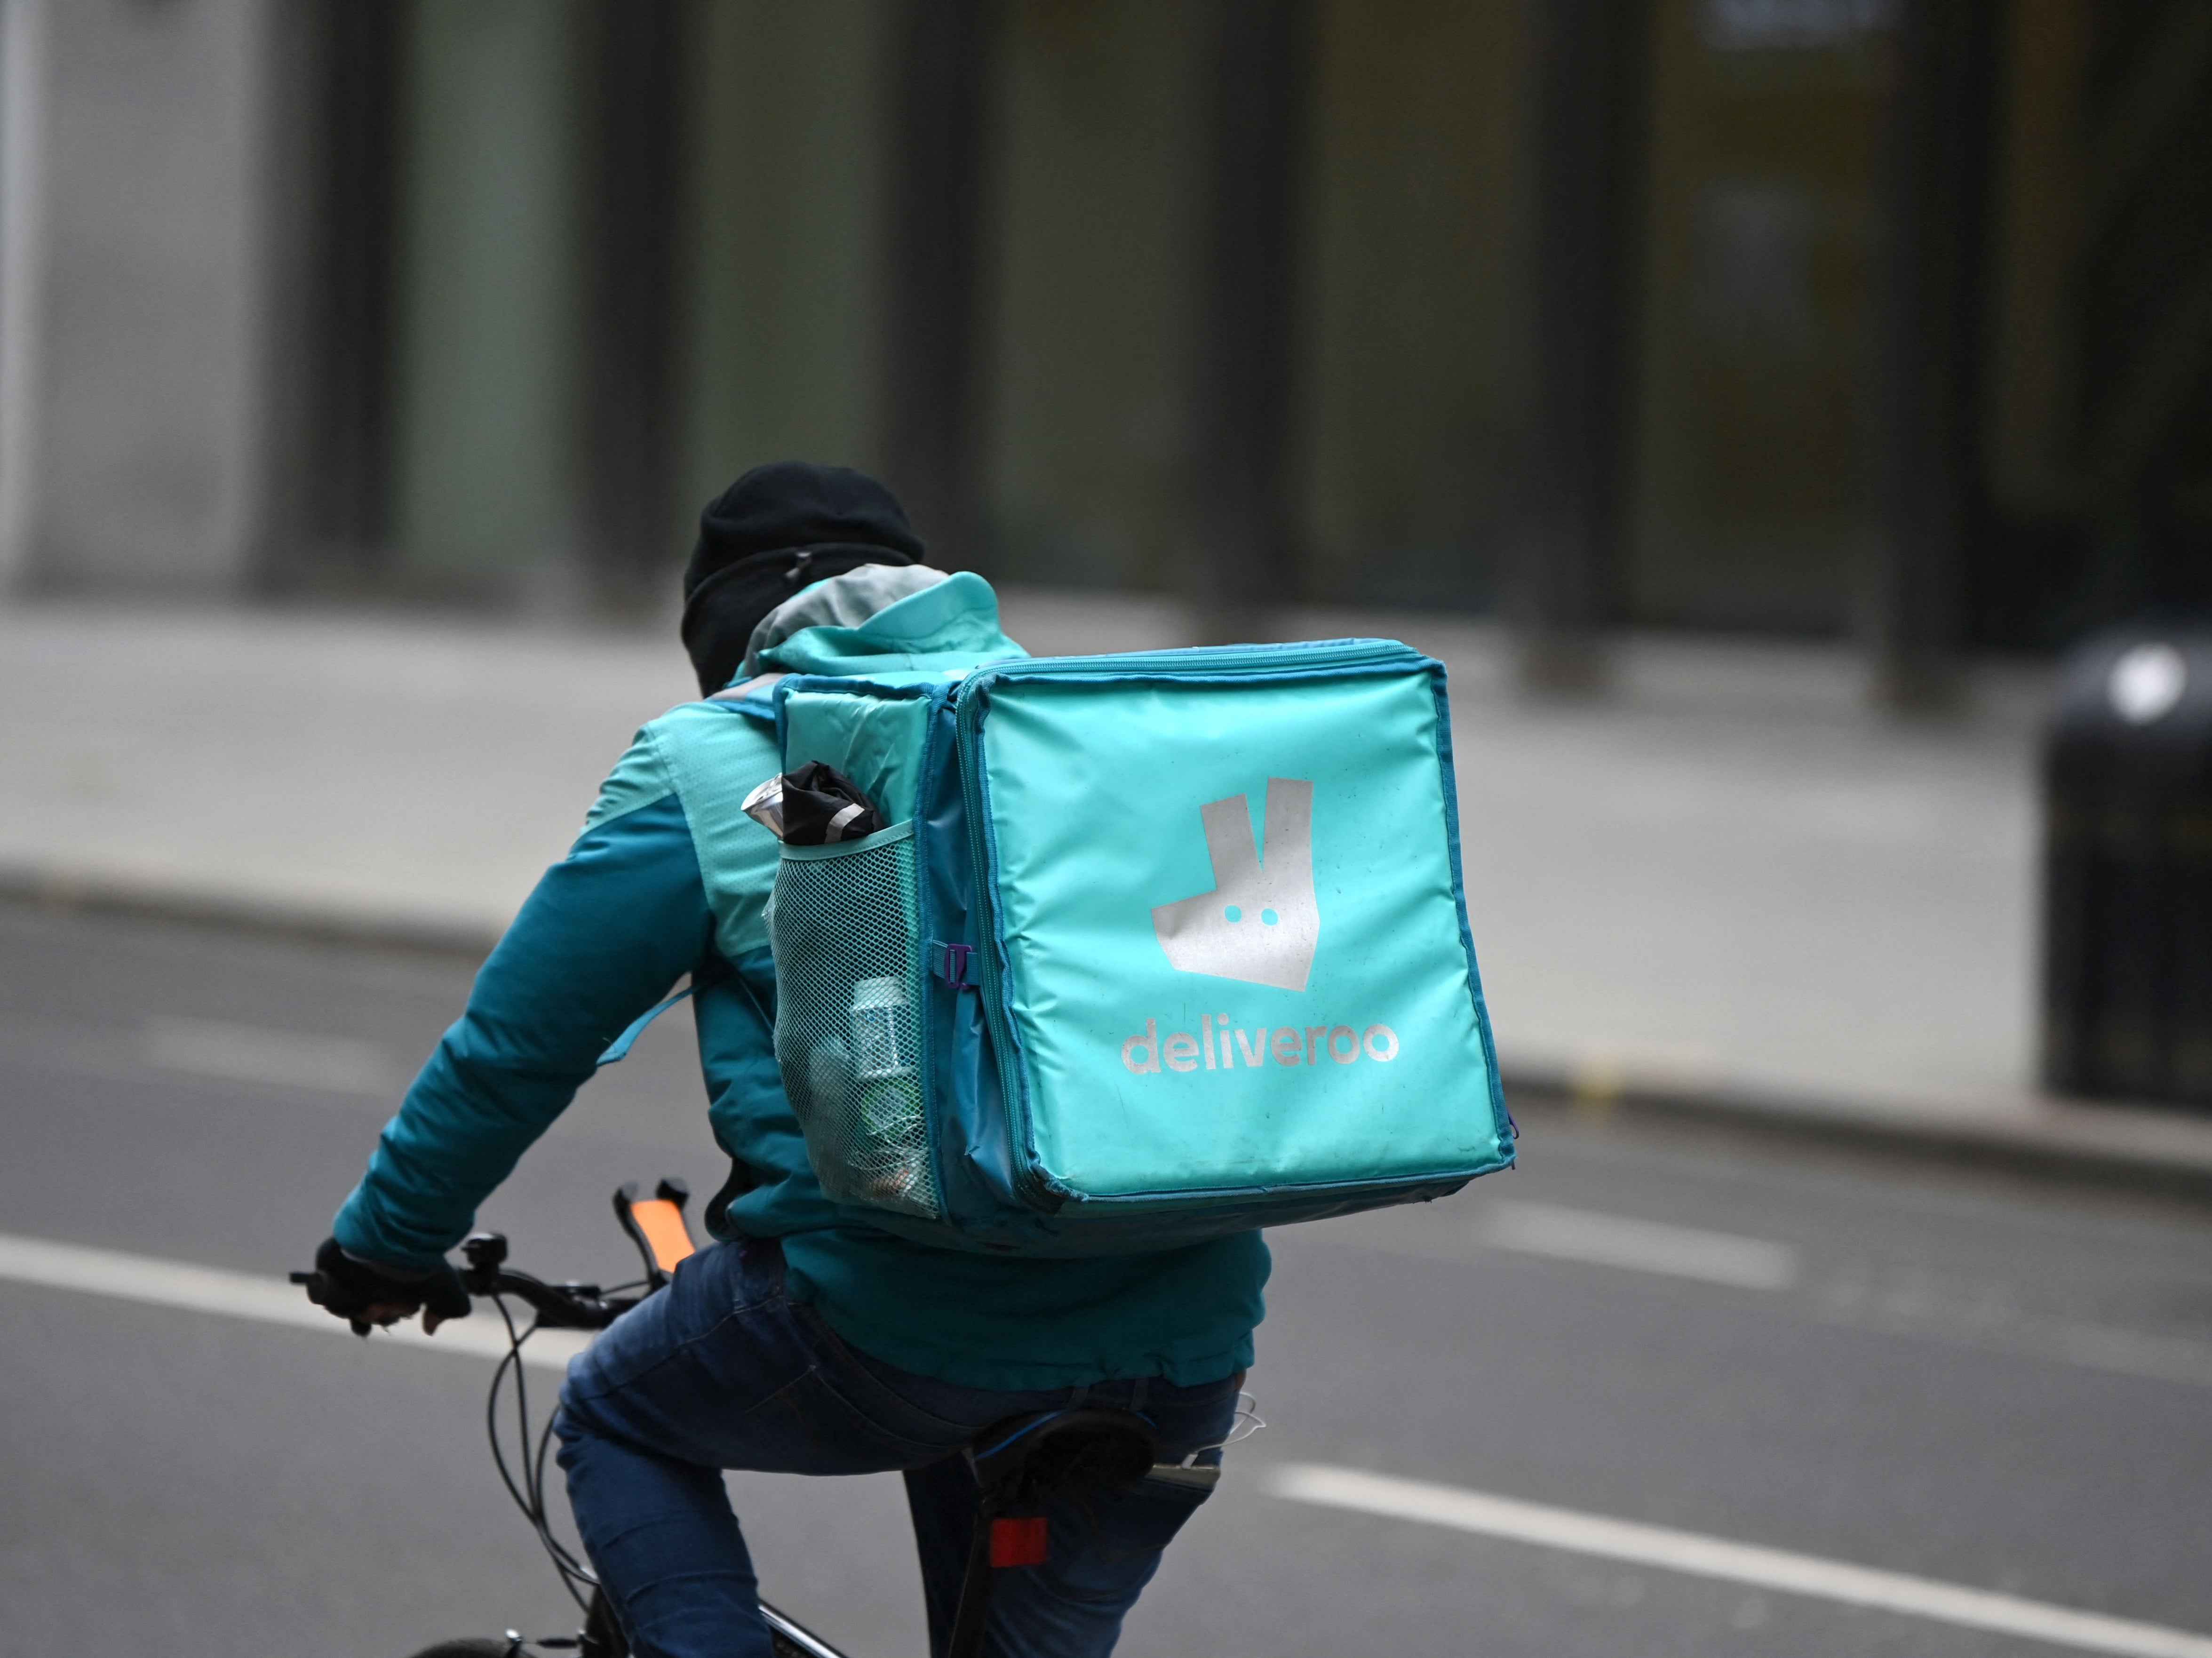 Deliveroo riders are expected to strike on 7 April, a union said